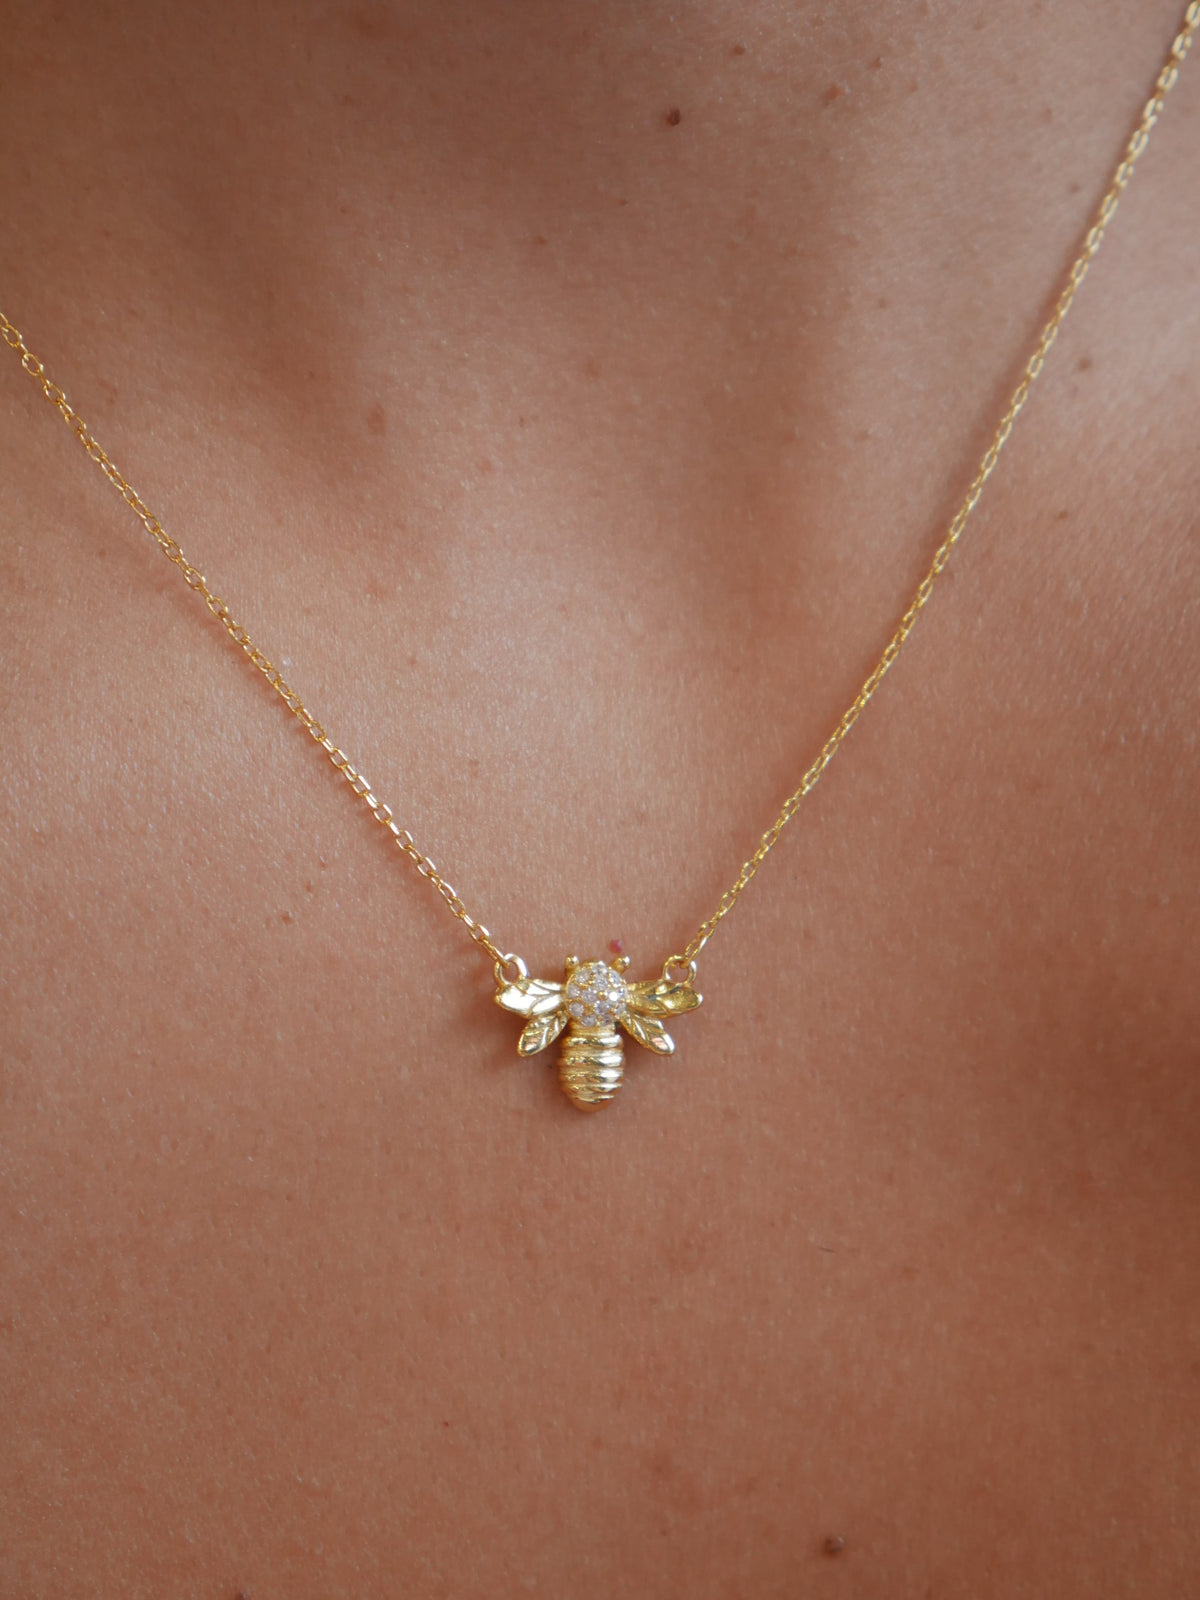 necklace, necklaces, bee necklace, gold plated necklaces, gold necklaces, womens jewelry, birthday gifts, anniversary gifts, nice jewelry, nice necklaces, fashion jewelry, fine jewelry, bee necklaces, birthday gifts, anniversary gifts, sterling silver necklaces, holiday gifts, graduation gifts, kesley jewelry, gold necklaces, designer jewelry, cool necklaces, jewelry gifts